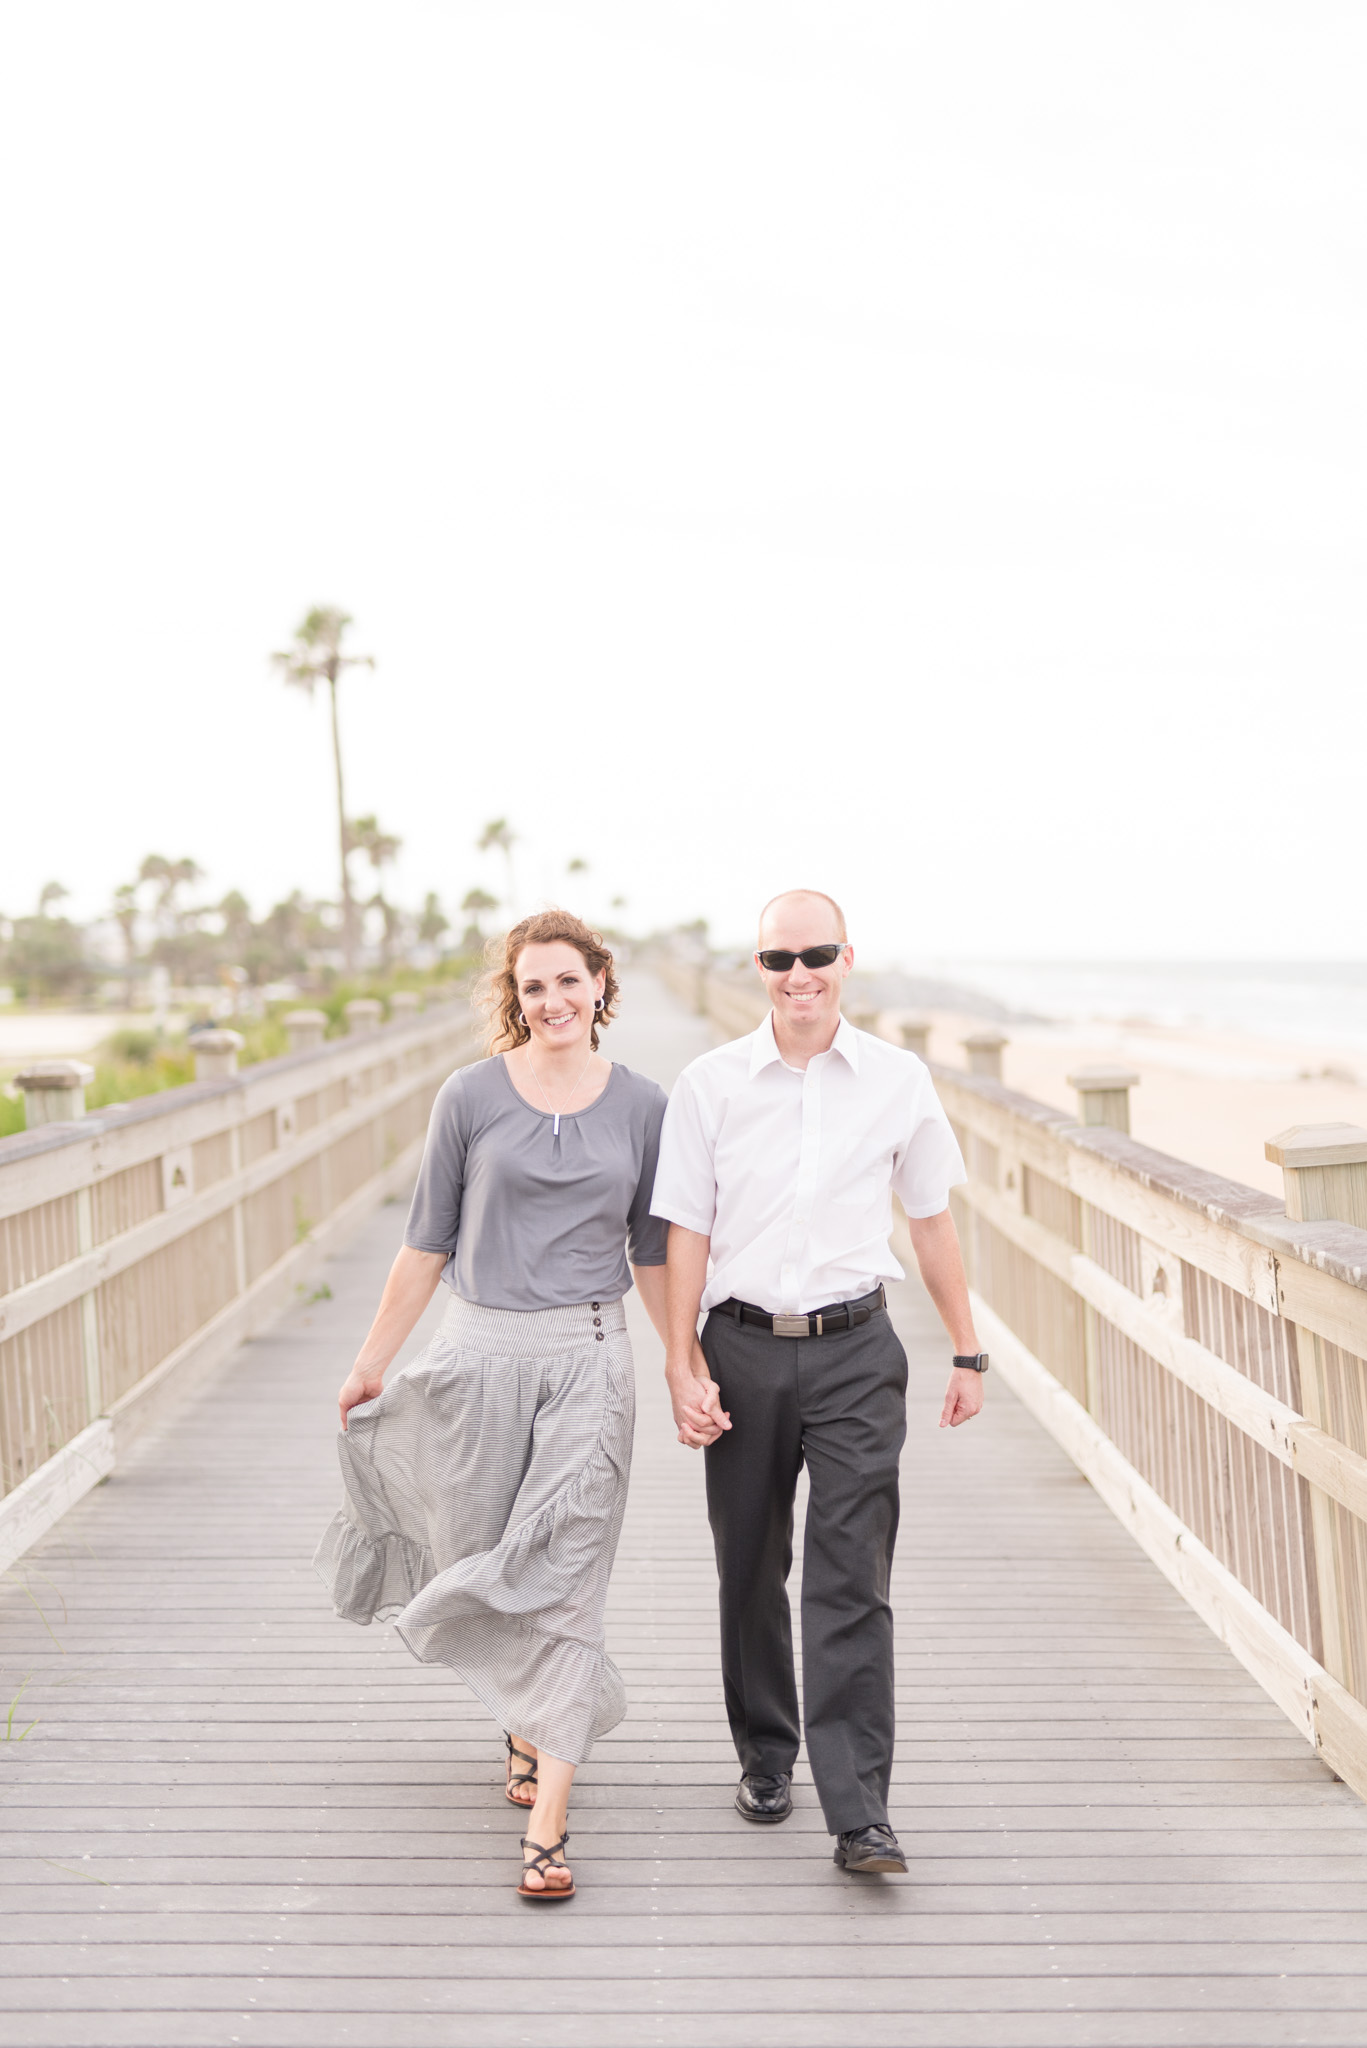 Couple looks at camera and smiles while walking.